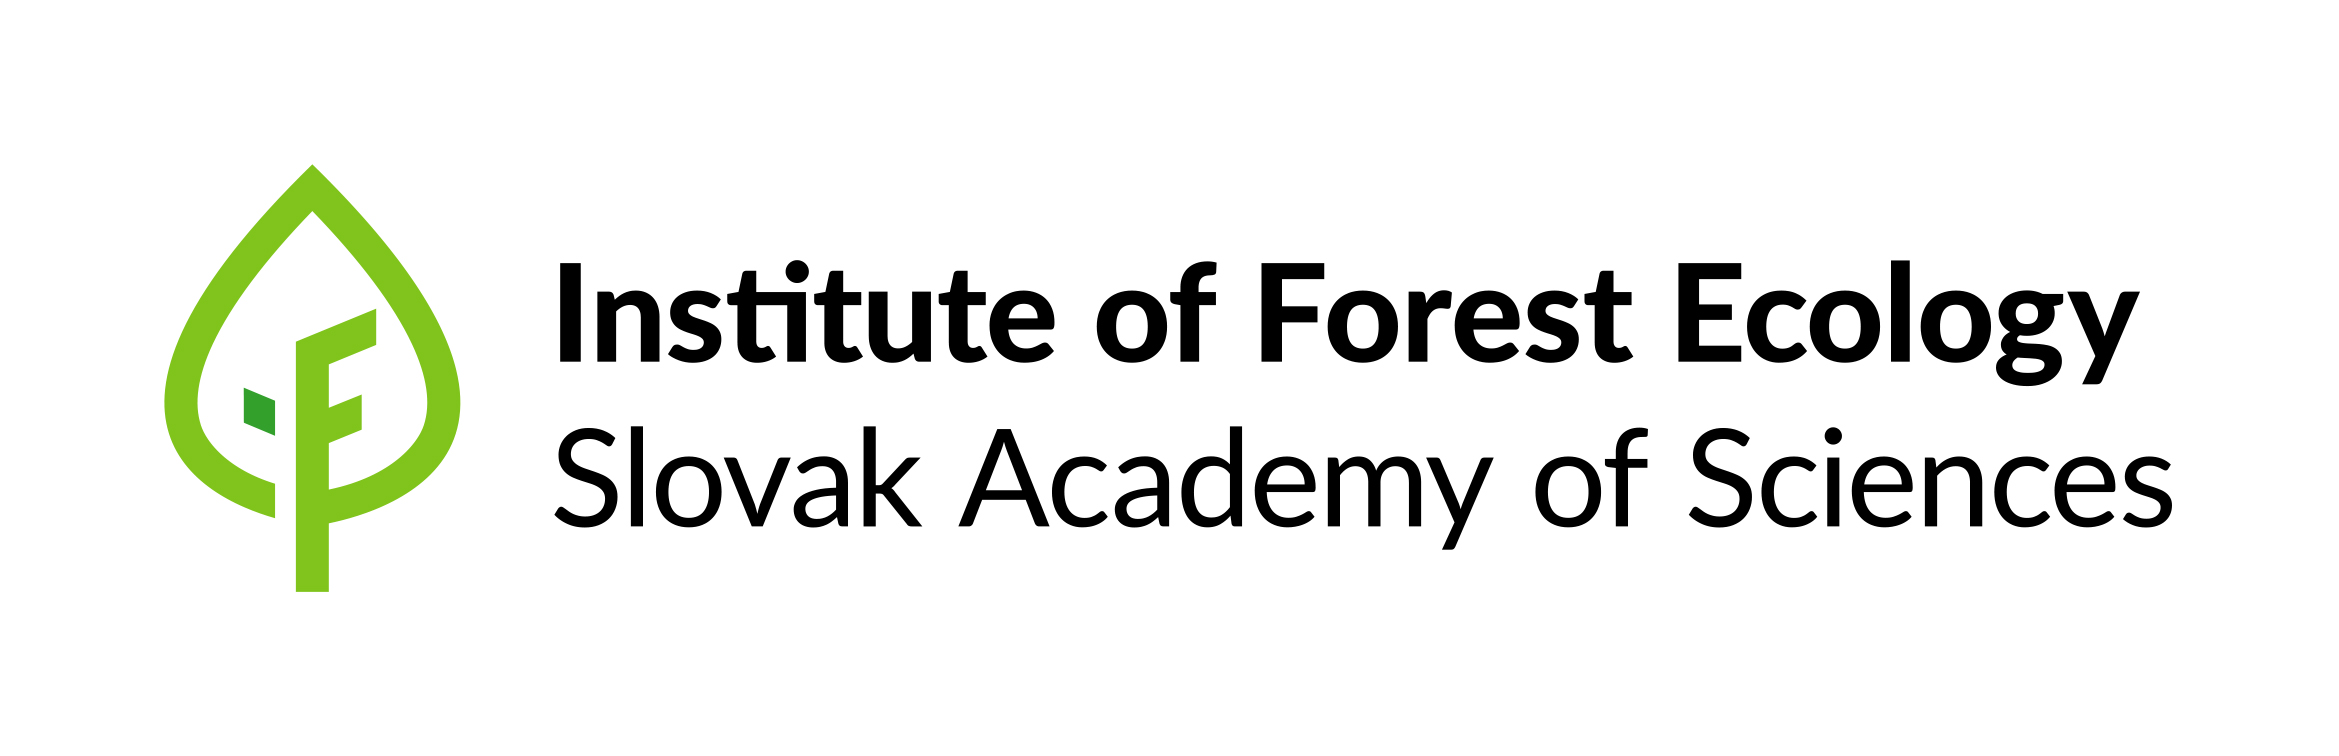 Institute of Forest Ecology, Slovak Academy of Sciences